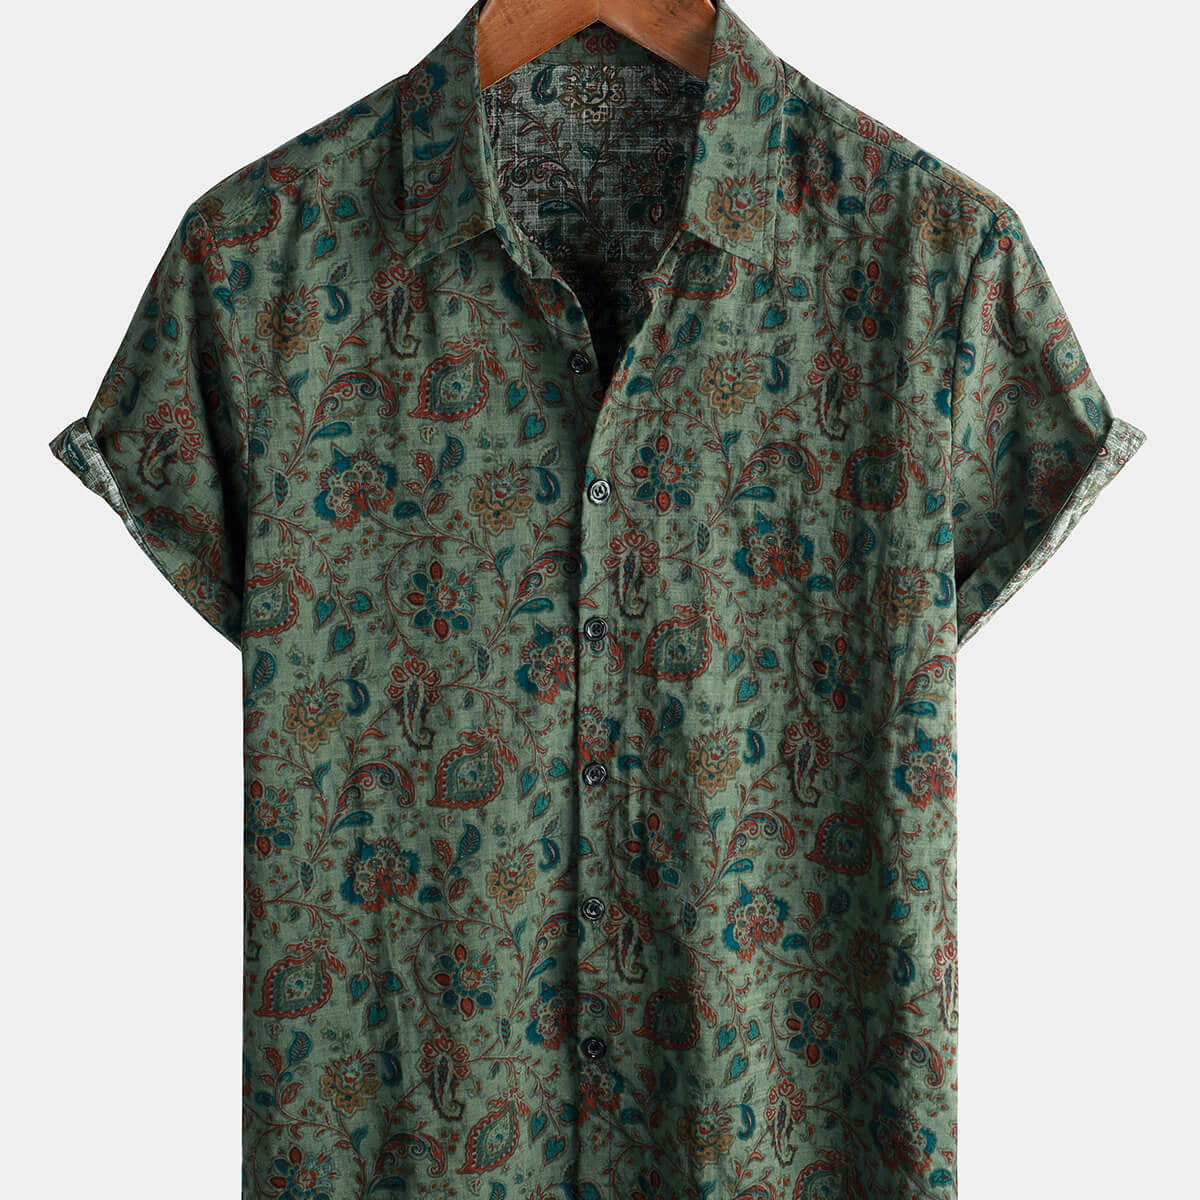 Men's Retro Paisley 70s Green Holiday Button Up Vintage Short Sleeve Shirt